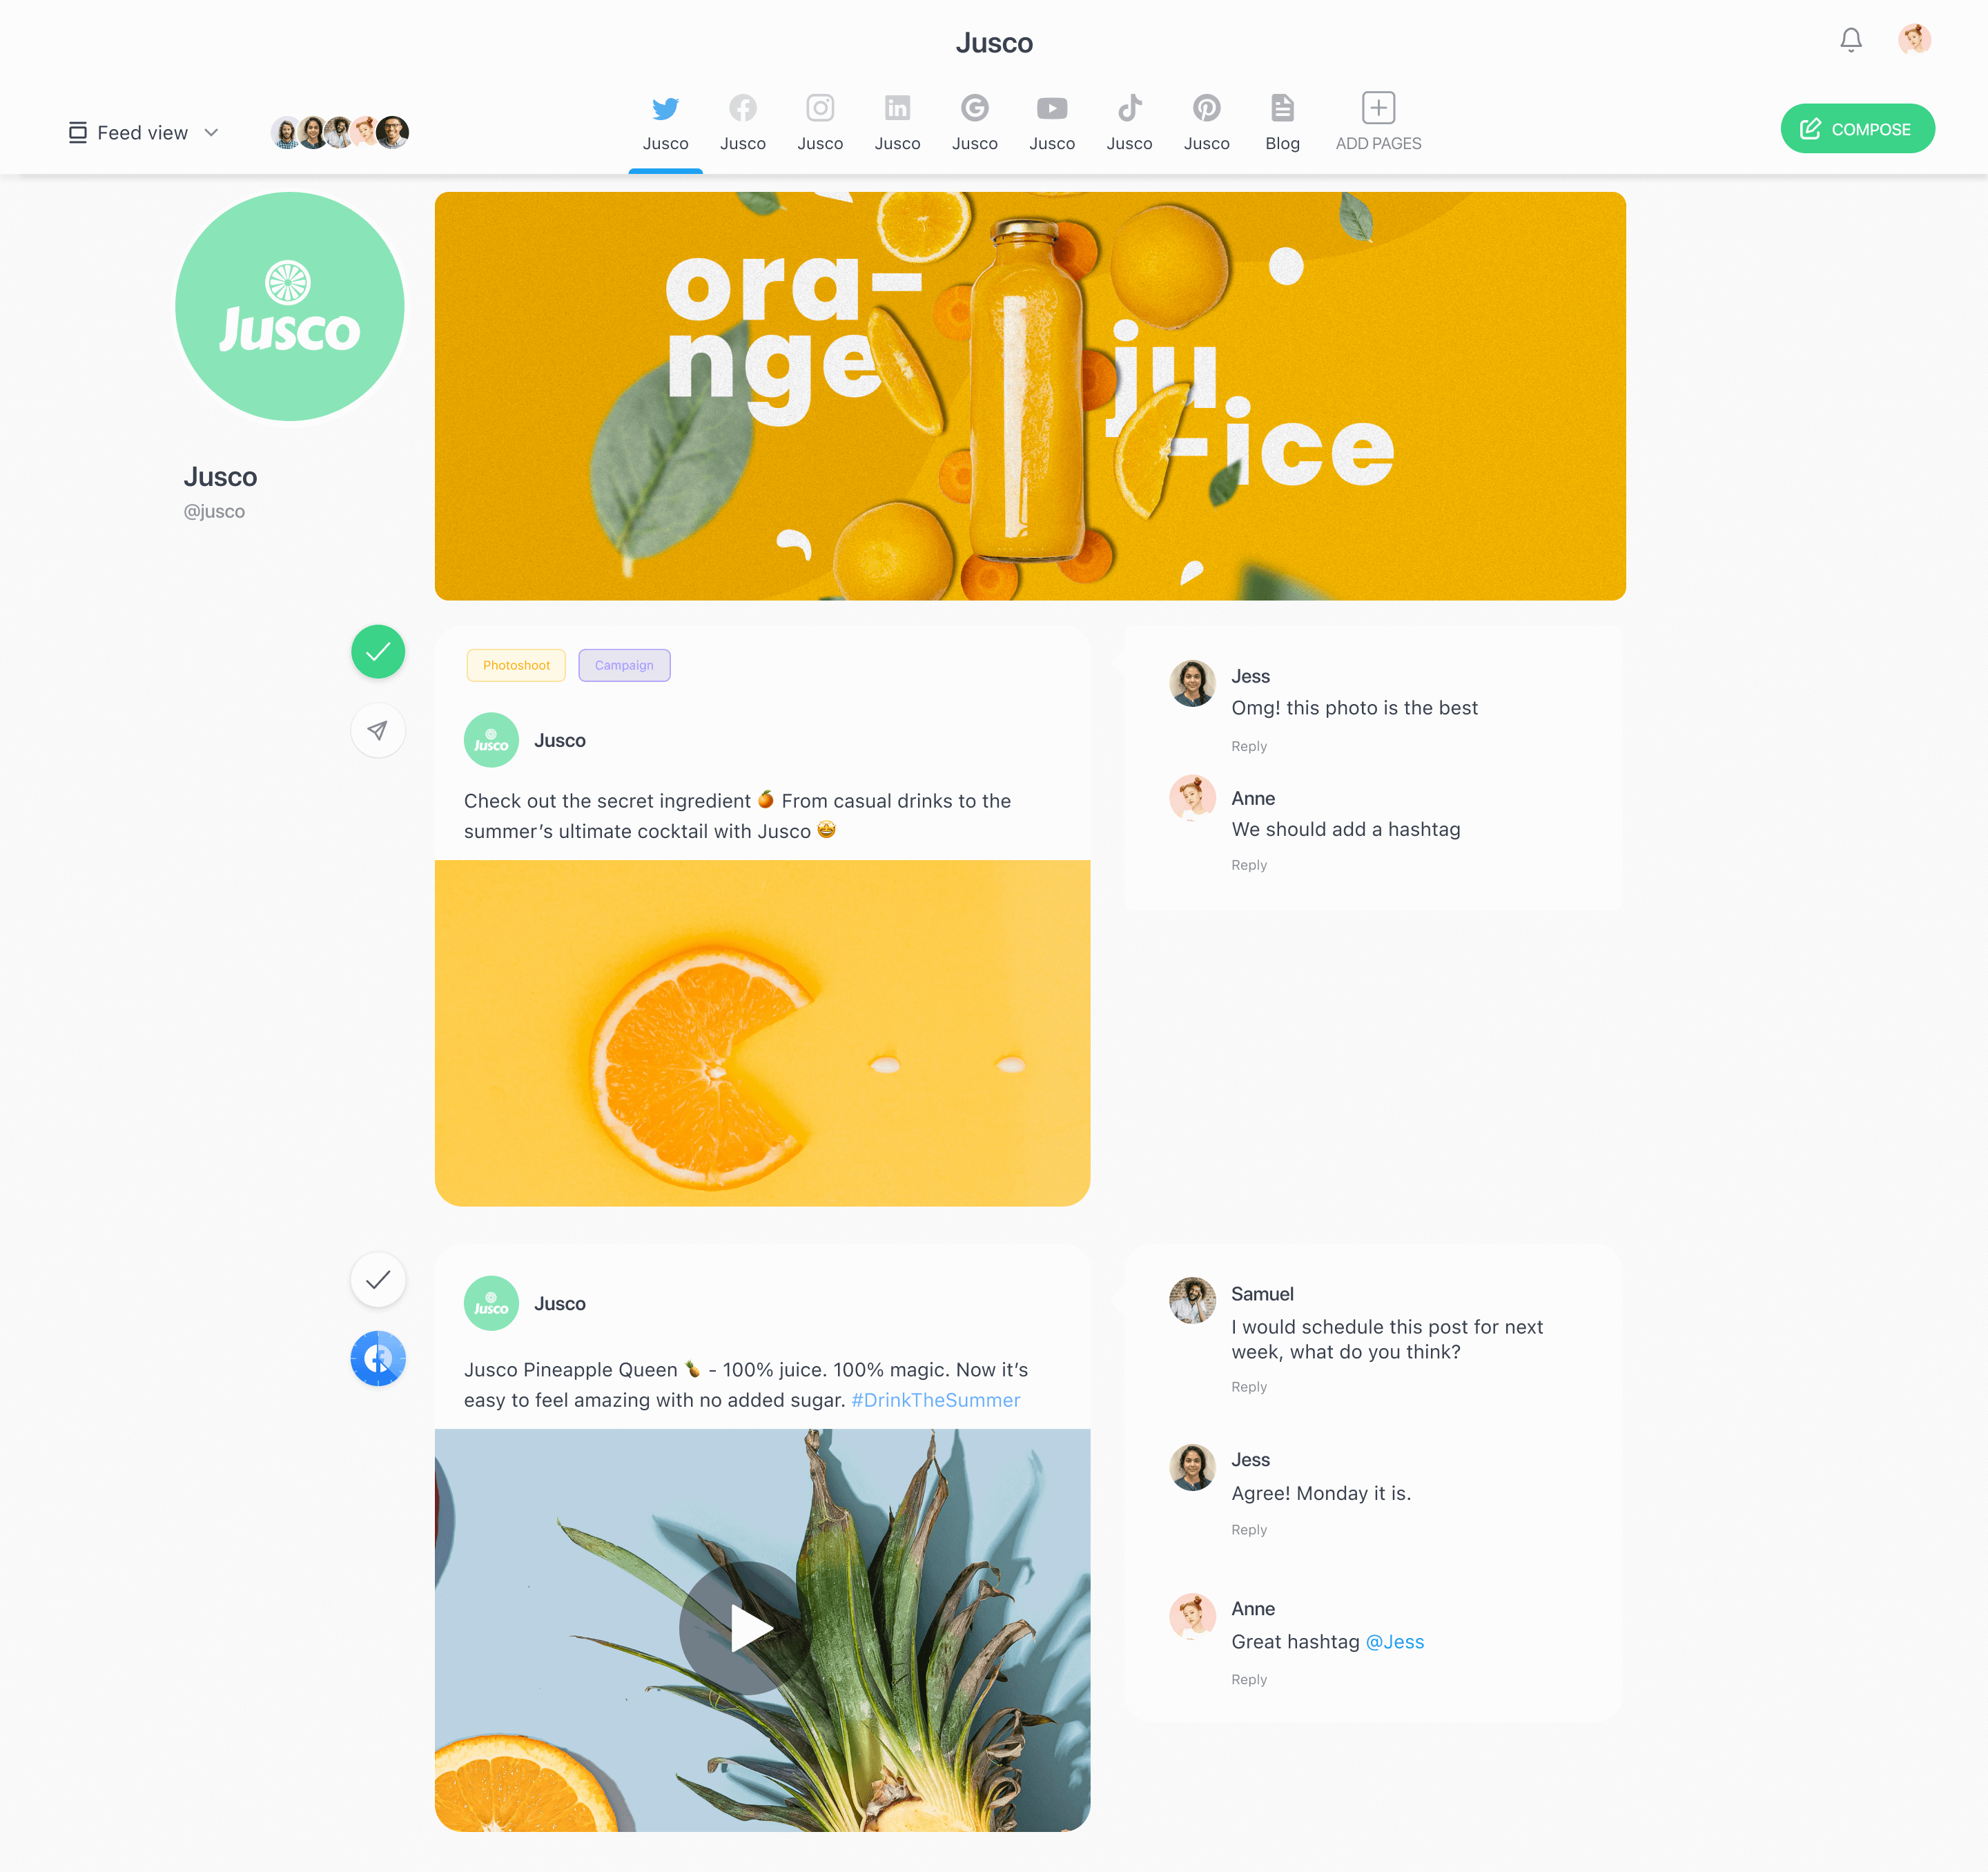 Jusco social media feed featuring posts about orange and pineapple juice, with comments from team members discussing hashtags and scheduling.